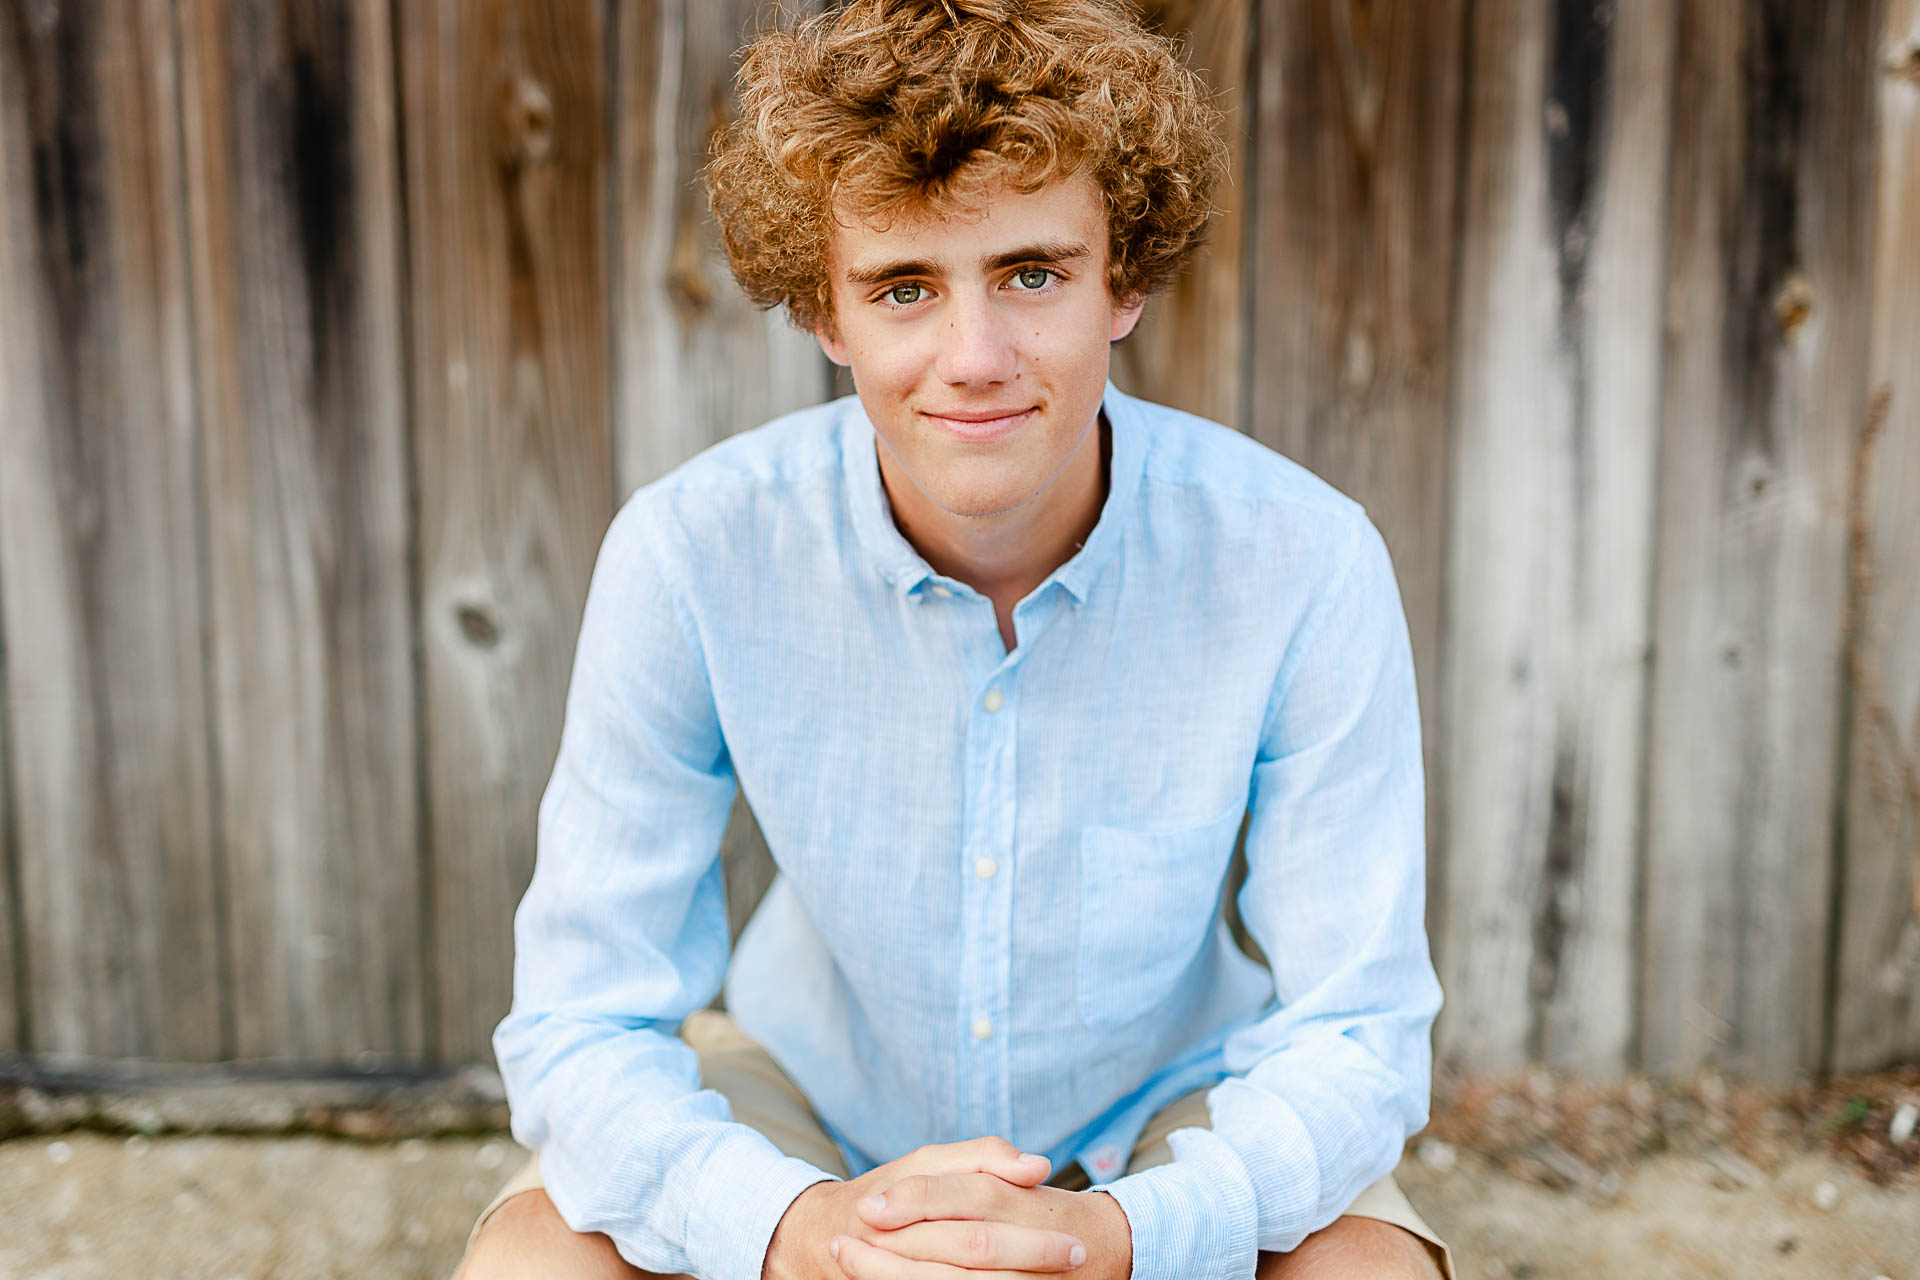 Photo by Scituate Senior Portrait Photographer Christina Runnals | High school senior boy sitting in front of wooden wall